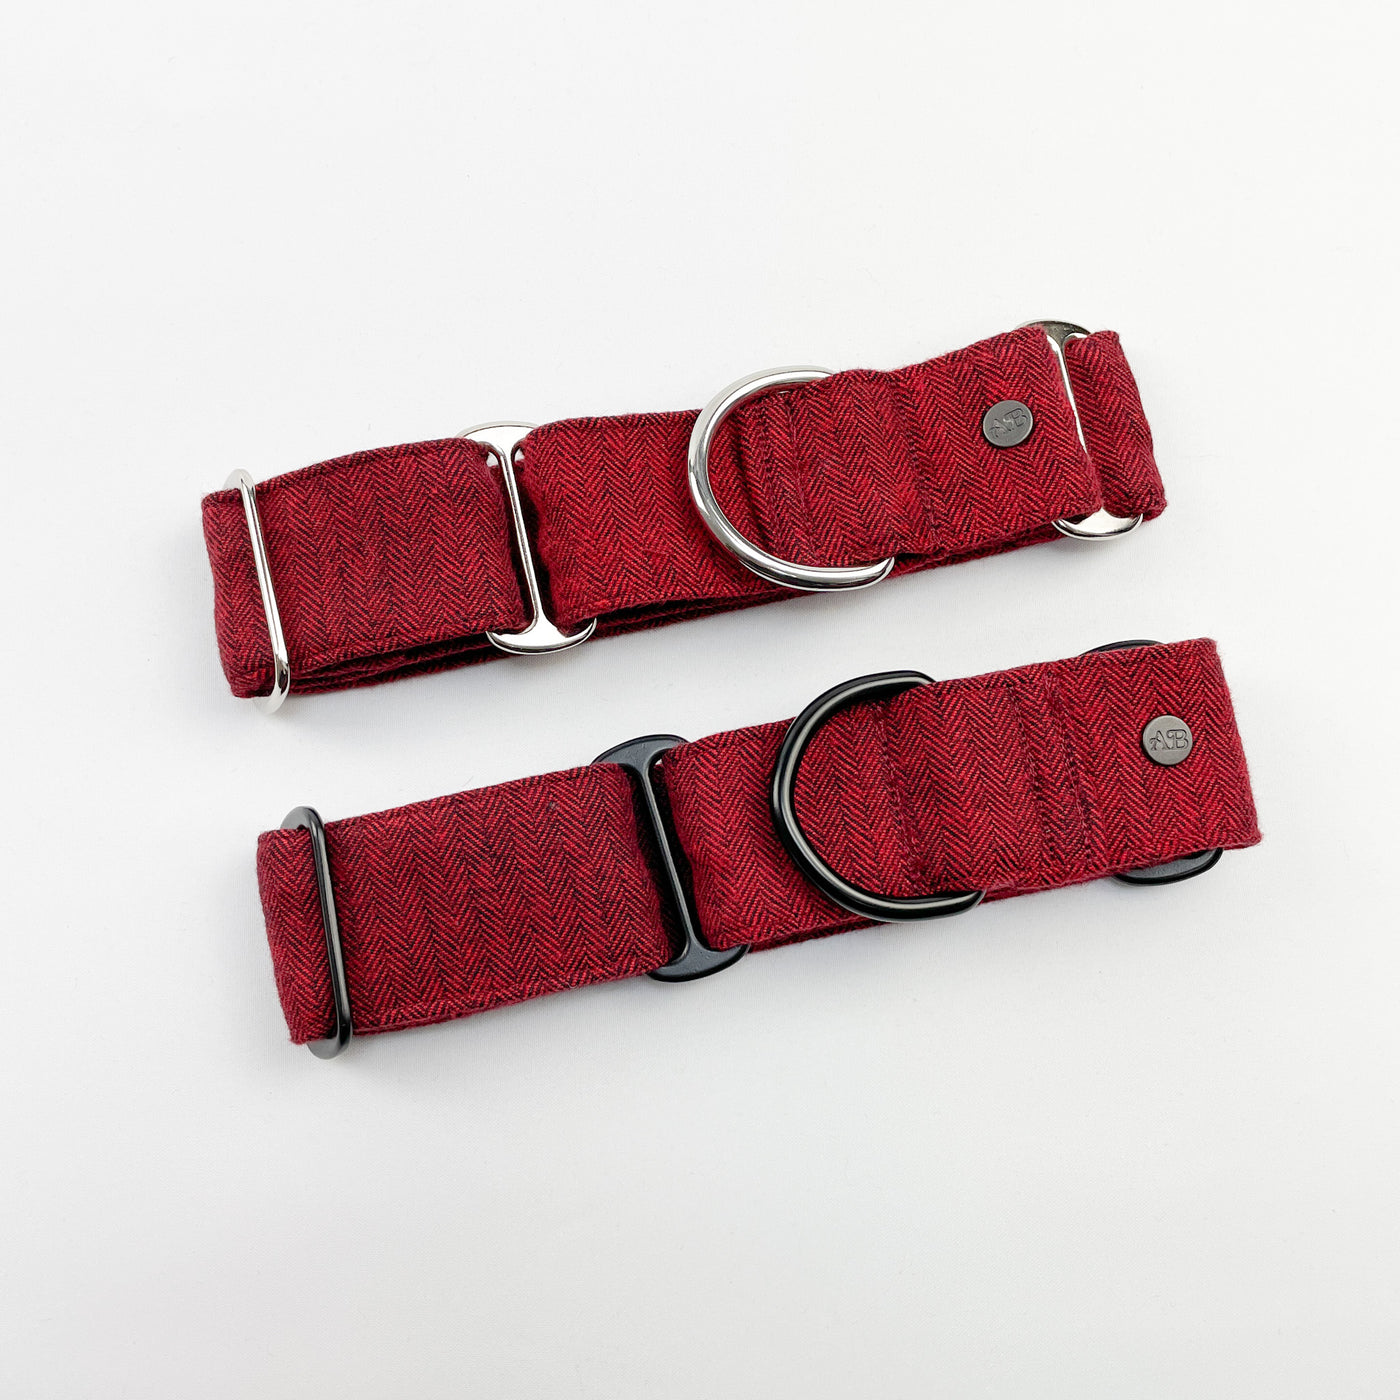 Cranberry herringbone martingale collar, one with silver and one with black fittings